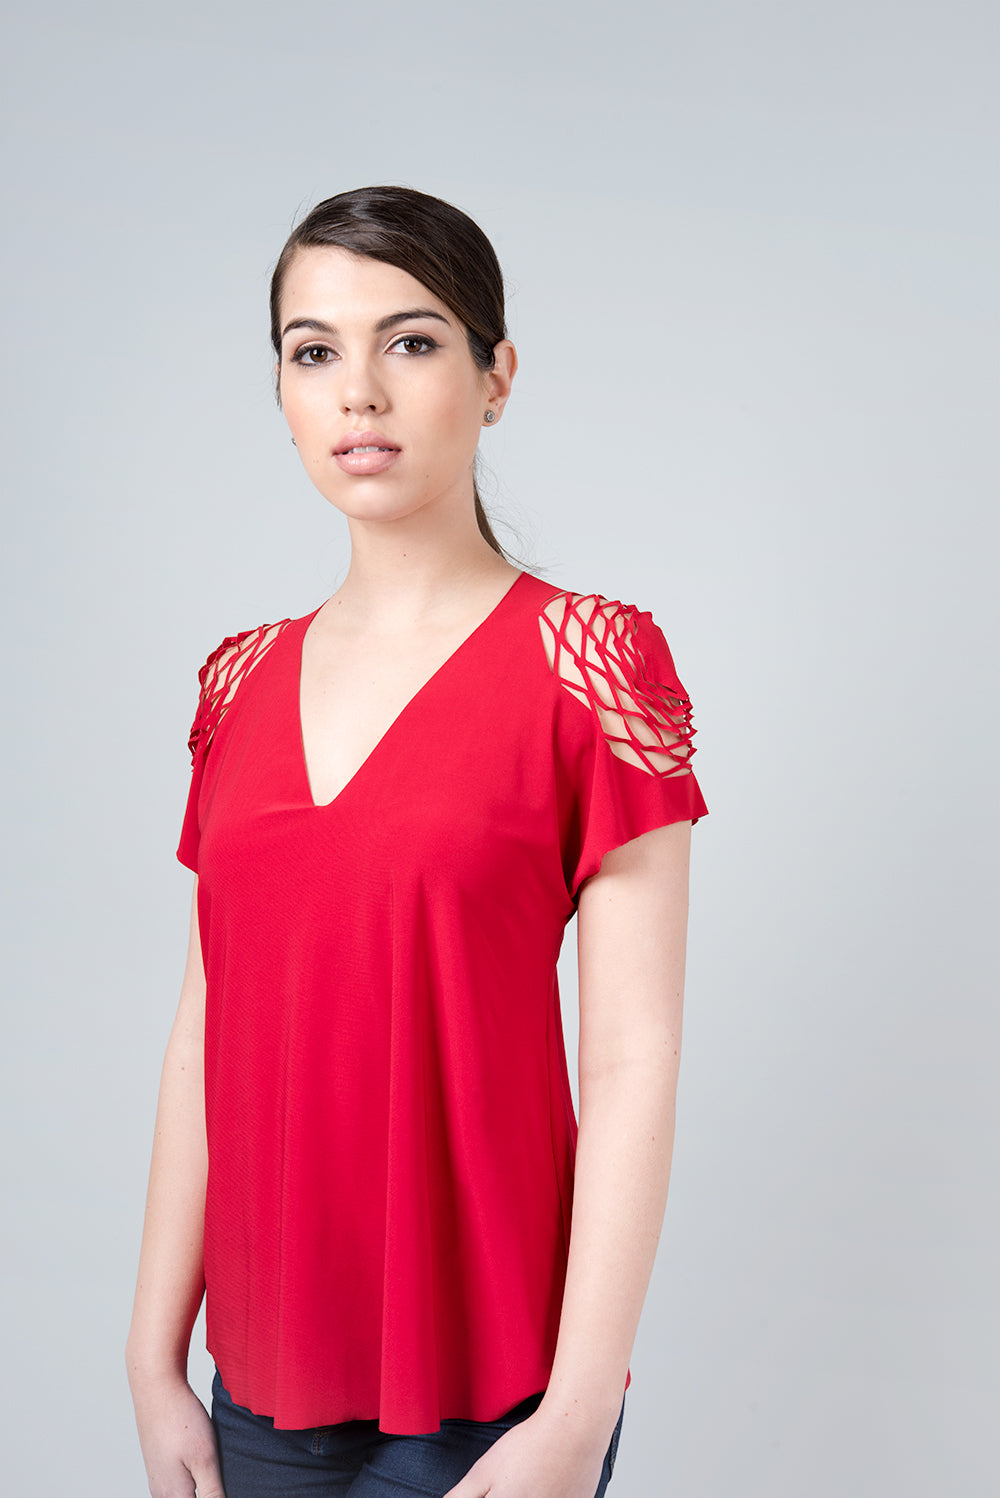 Red delta shirt - shirt with hexagons on the shoulder 